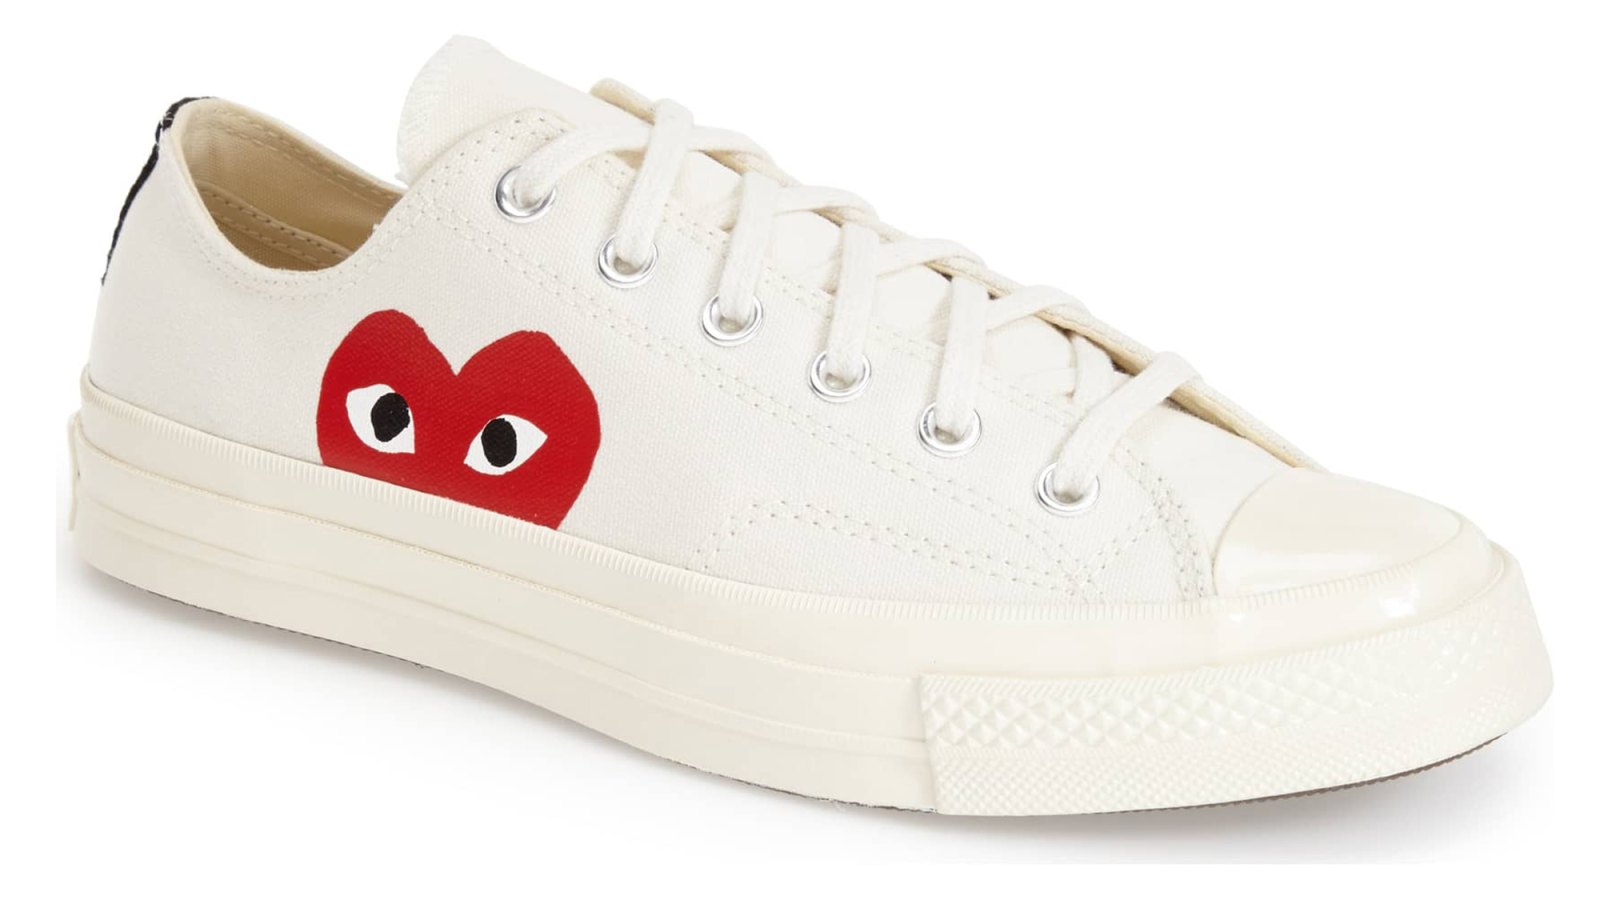 Isse del Abundantly This Converse X Comme des Garcons Sneaker Is Too Cute